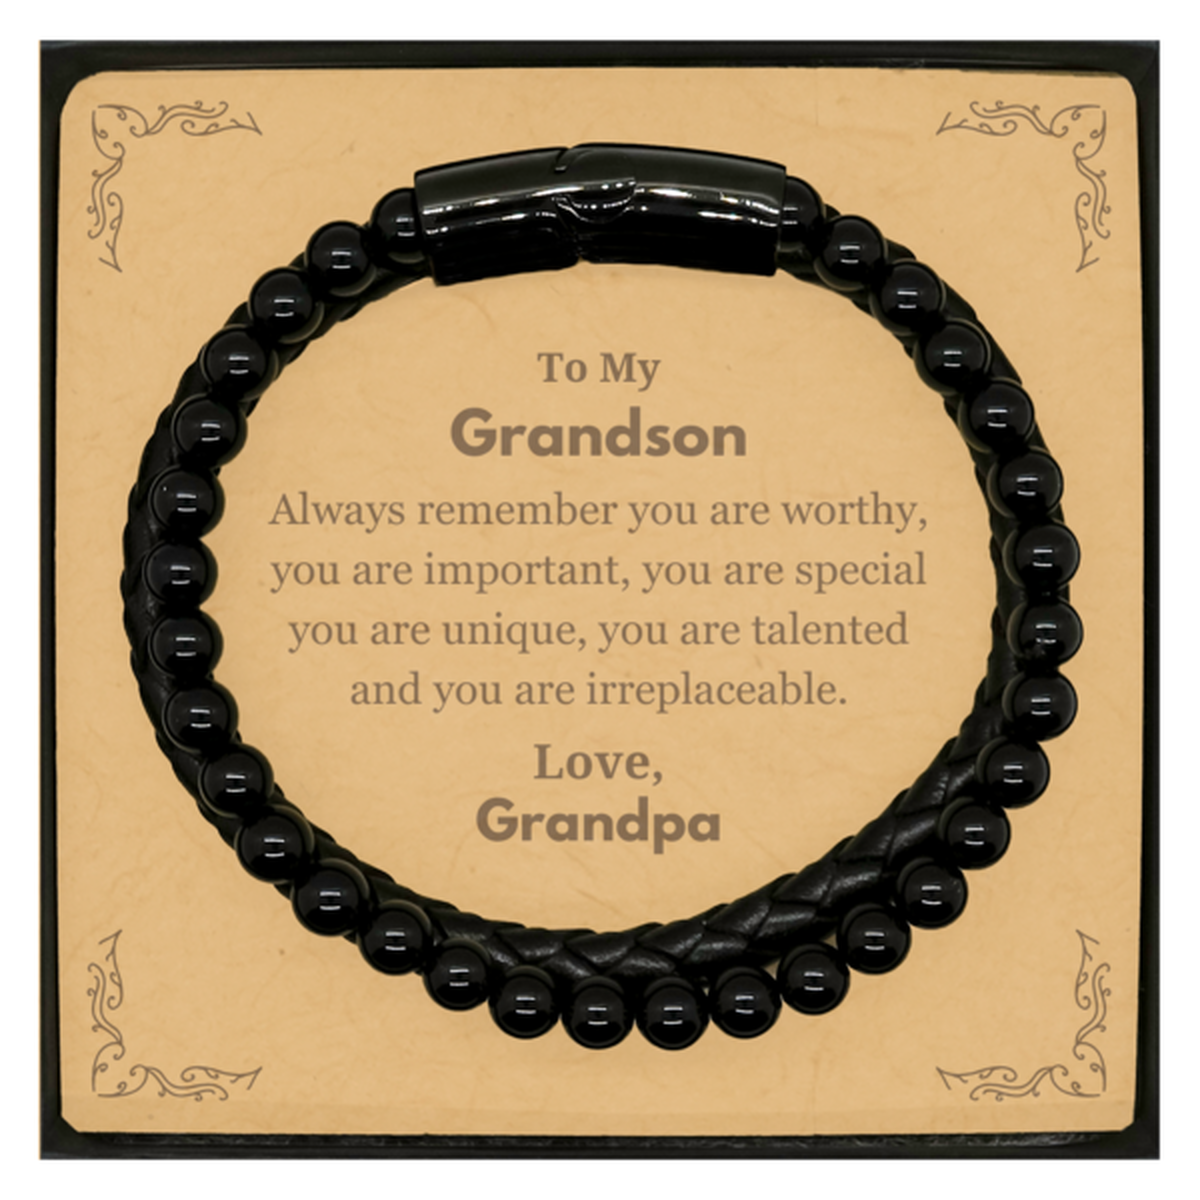 Grandson Birthday Gifts from Grandpa, Inspirational Stone Leather Bracelets for Grandson Christmas Graduation Gifts for Grandson Always remember you are worthy, you are important. Love, Grandpa